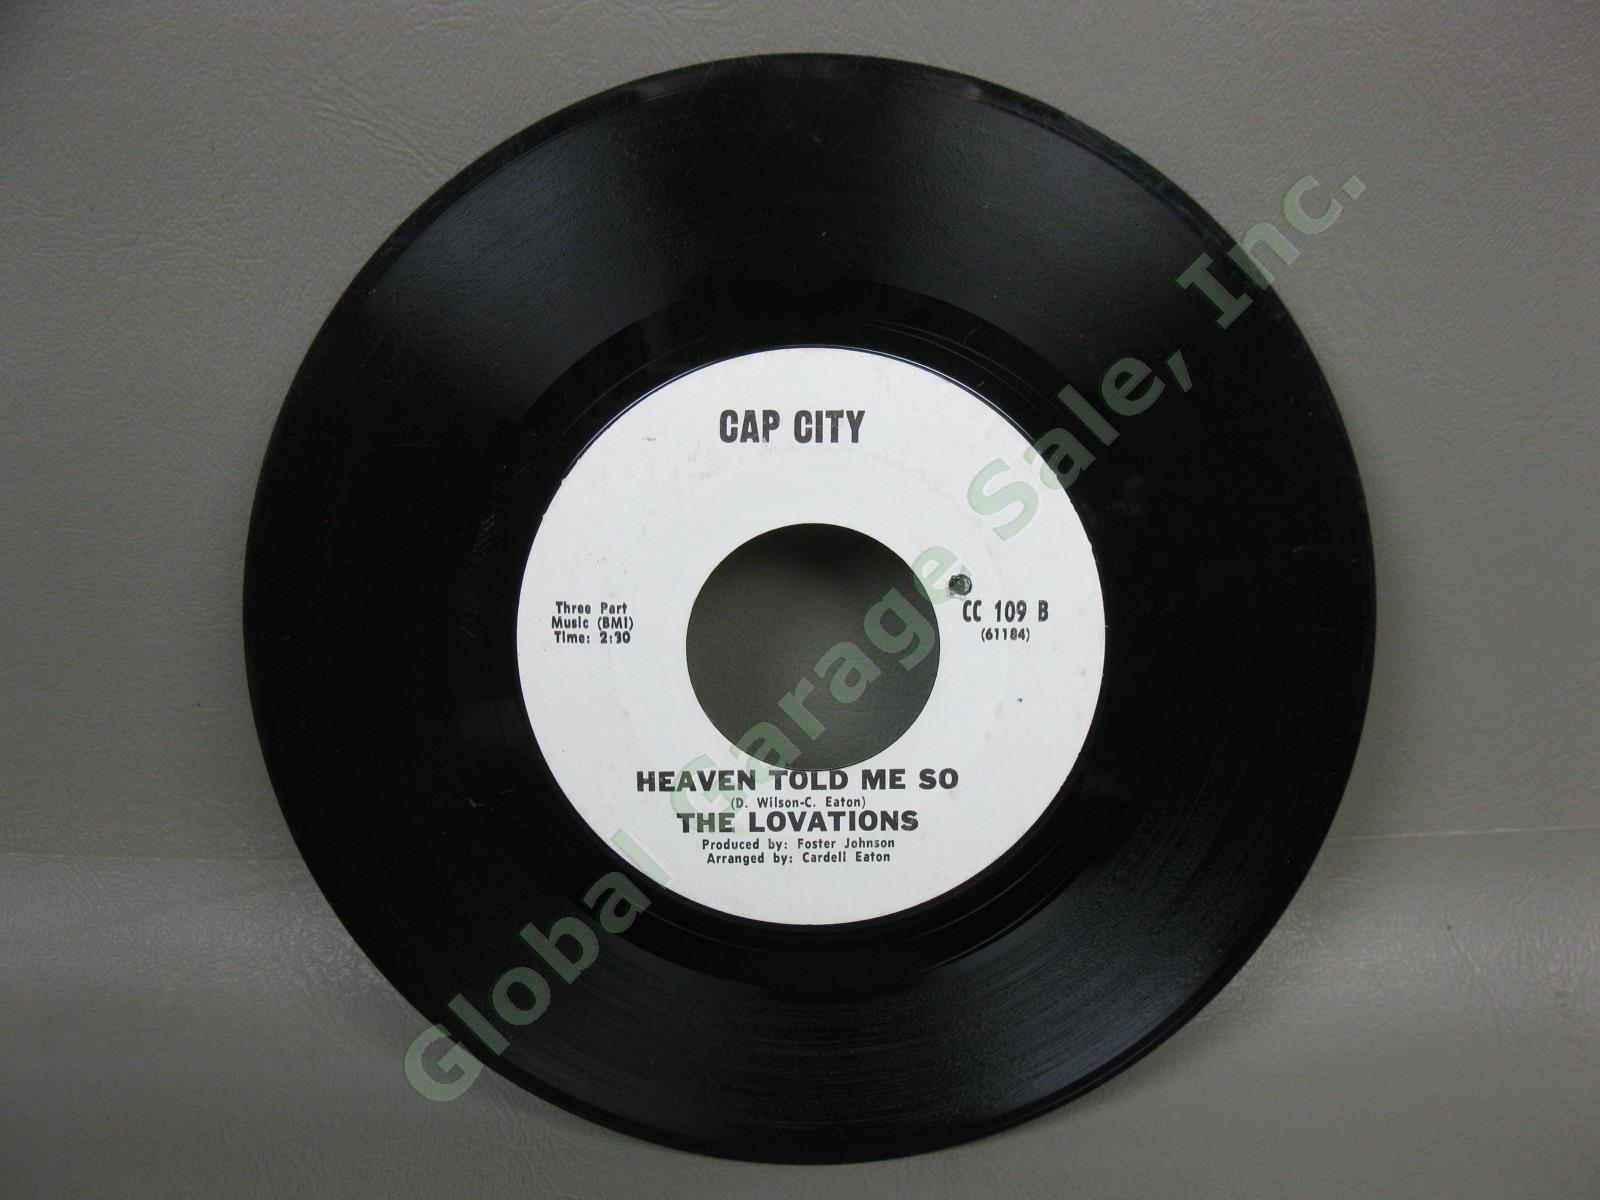 The Lovations I Keep Singing Heaven Told Me So Northern Soul Promo 45 Cap City 3